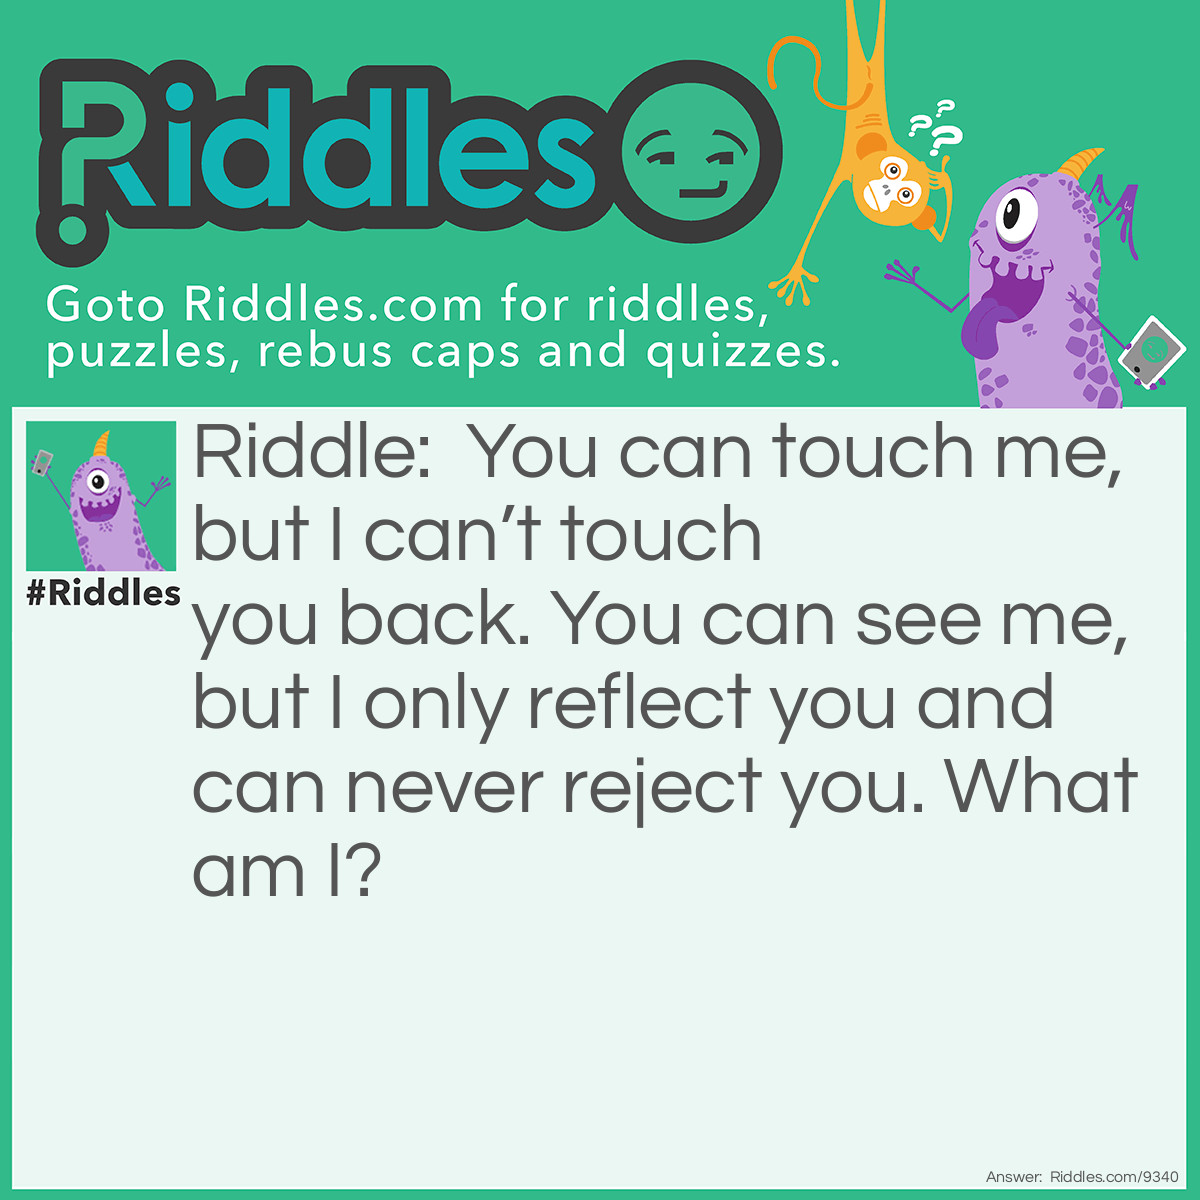 Riddle: You can touch me, but I can't touch you back. You can see me, but I only reflect you and can never reject you. What am I? Answer: A mirror.